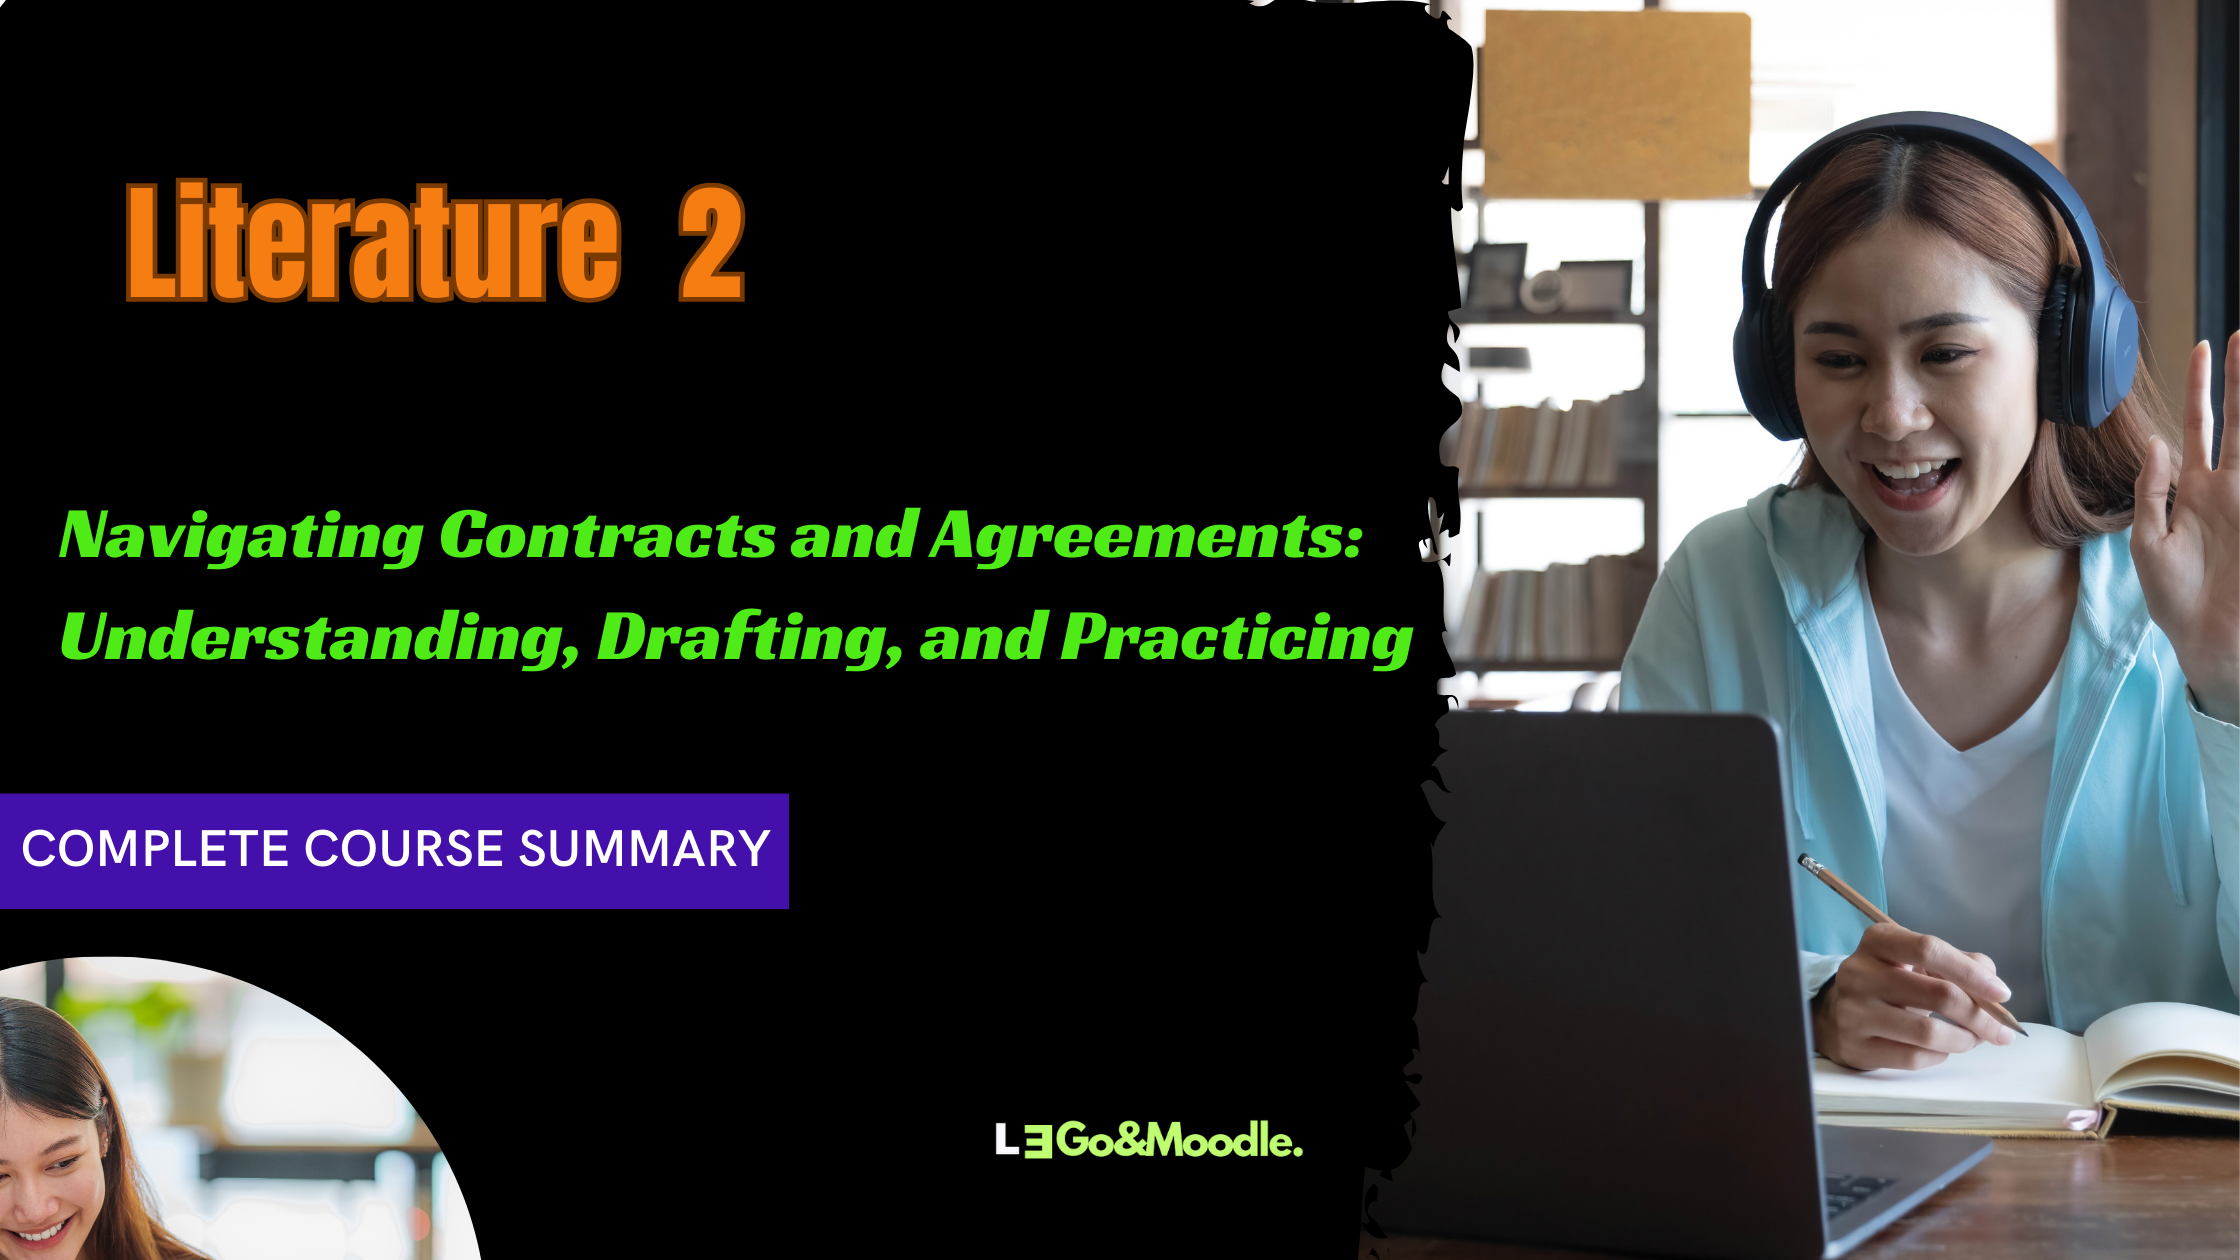 Navigating Contracts and Agreements: Understanding, Drafting, and Practicing/UFC literature 2